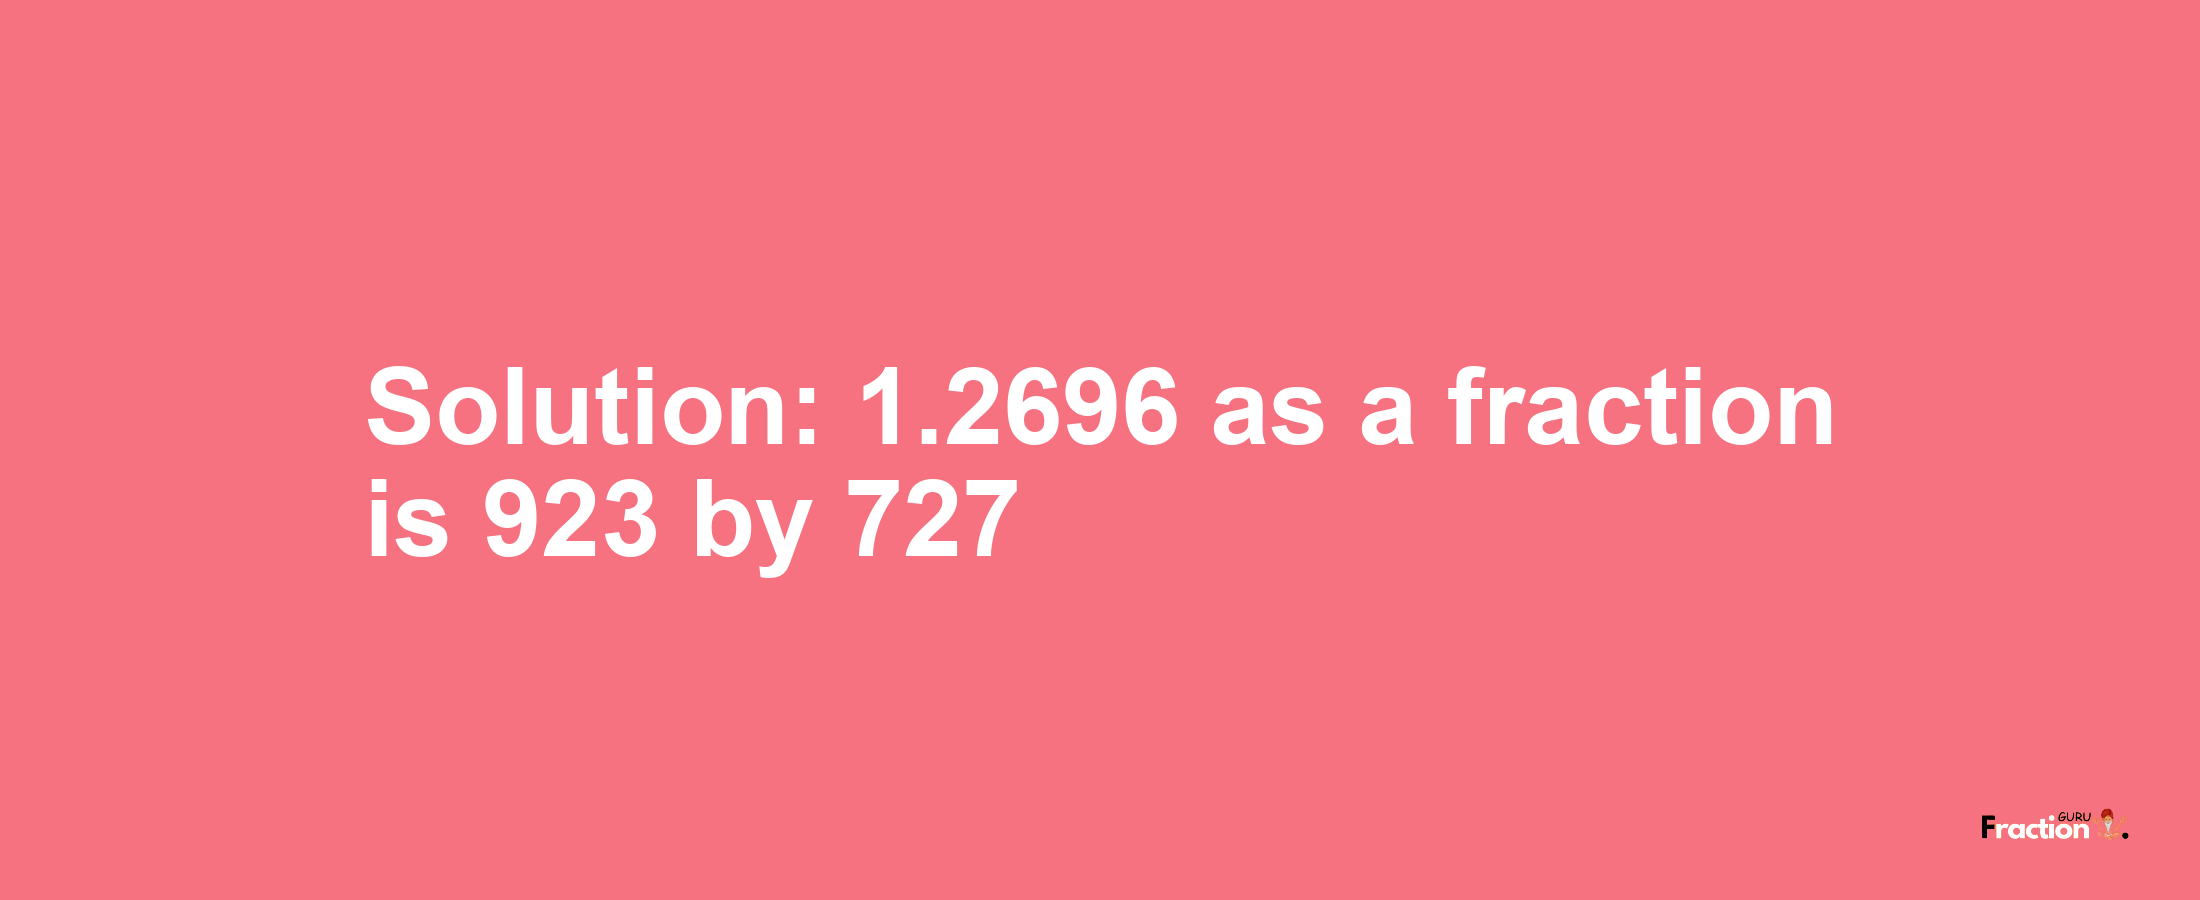 Solution:1.2696 as a fraction is 923/727